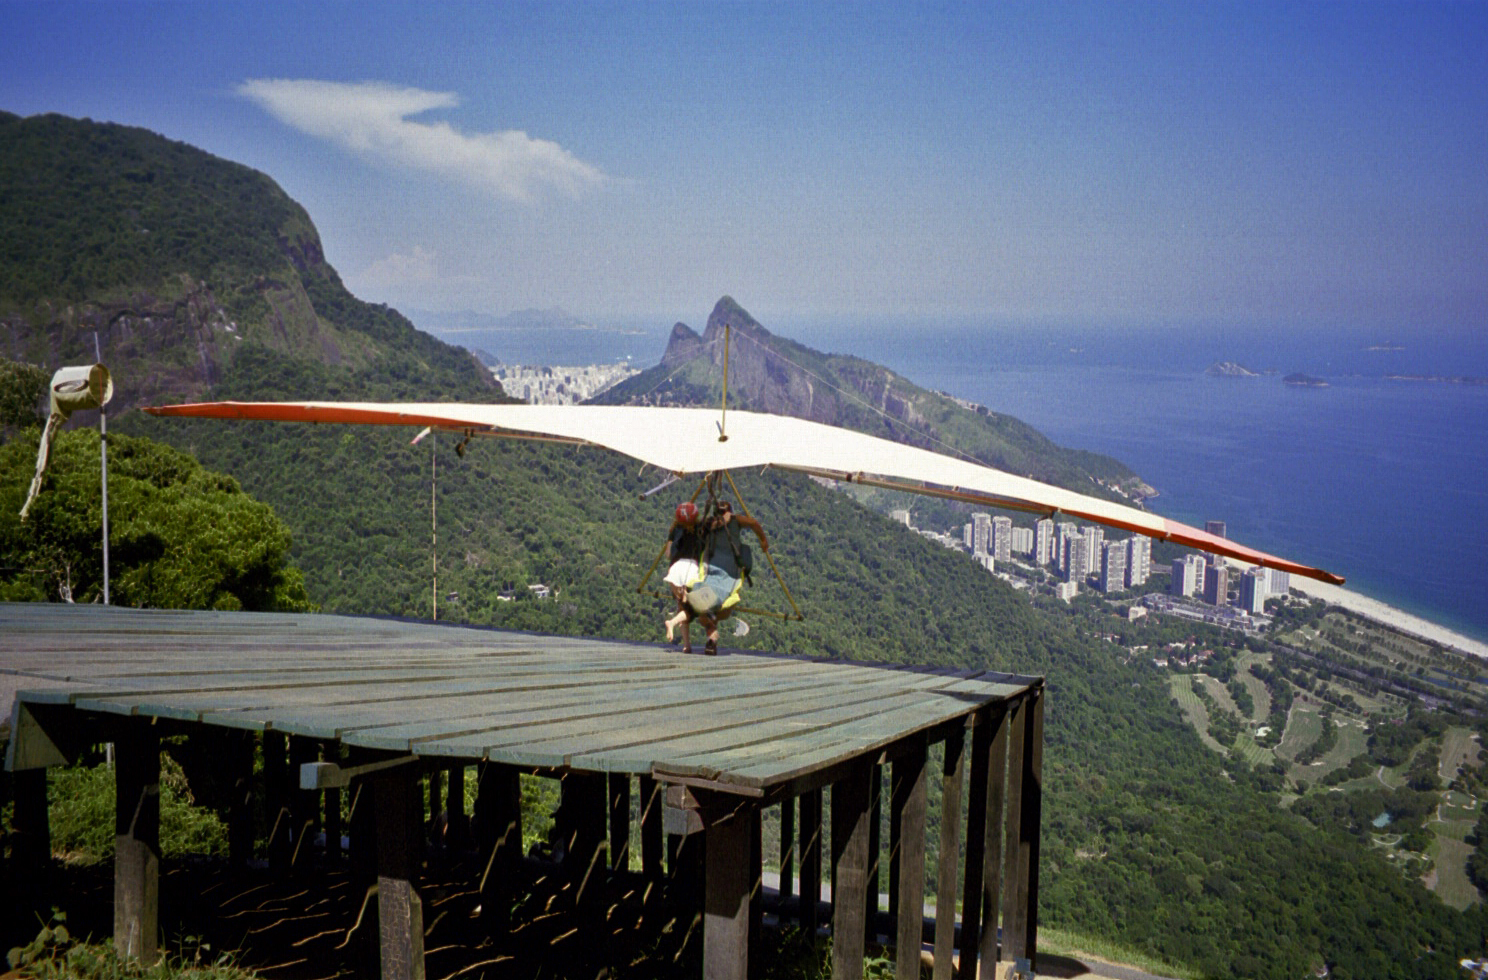 above Rio de Janeiro (note: this image is not suitable for large prints)